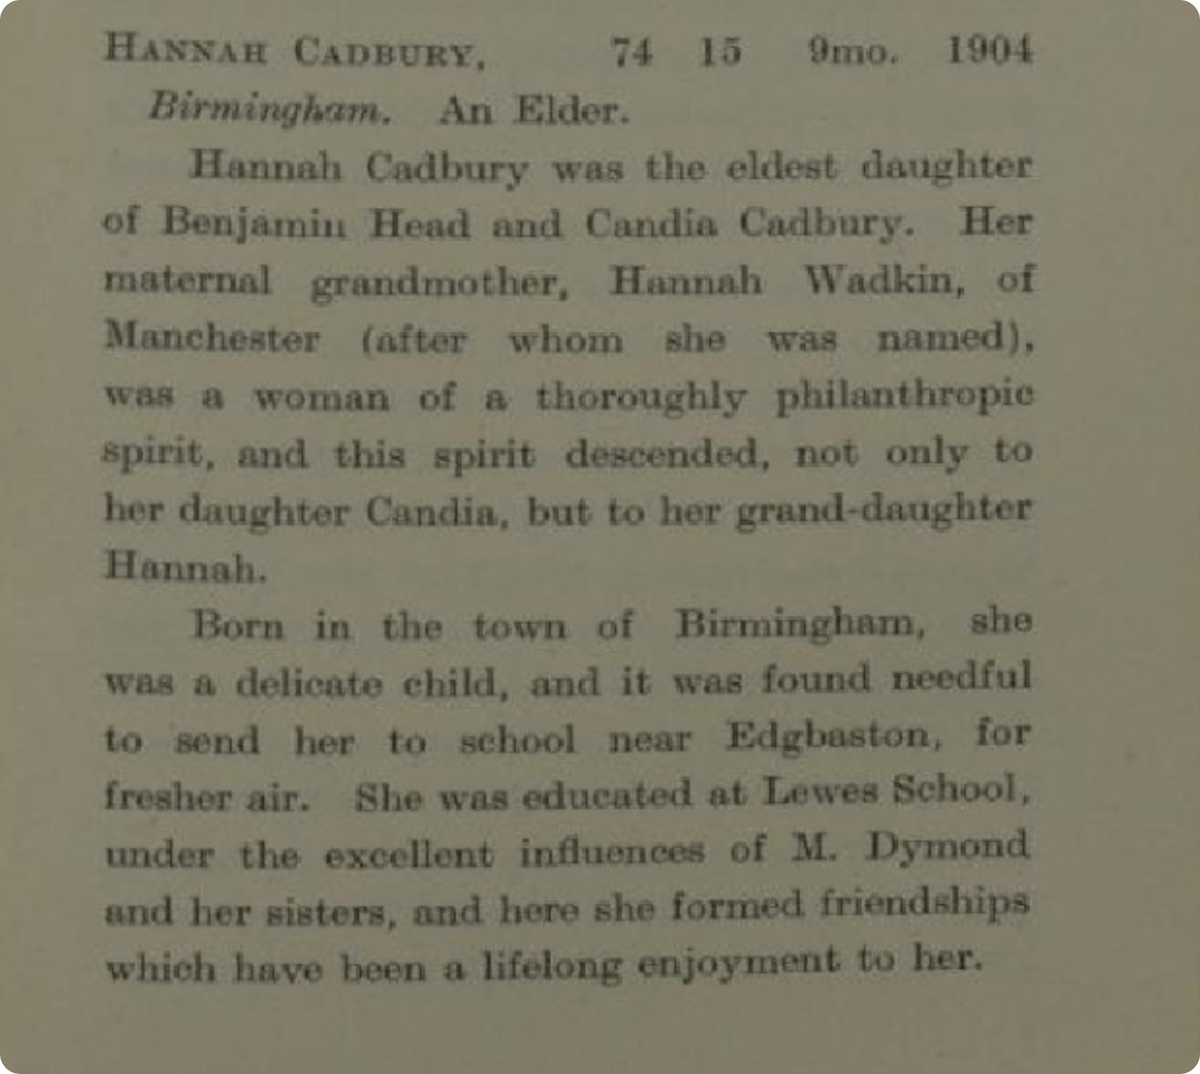 The start of the memoir of Hannah Cadbury, which lasts four pages